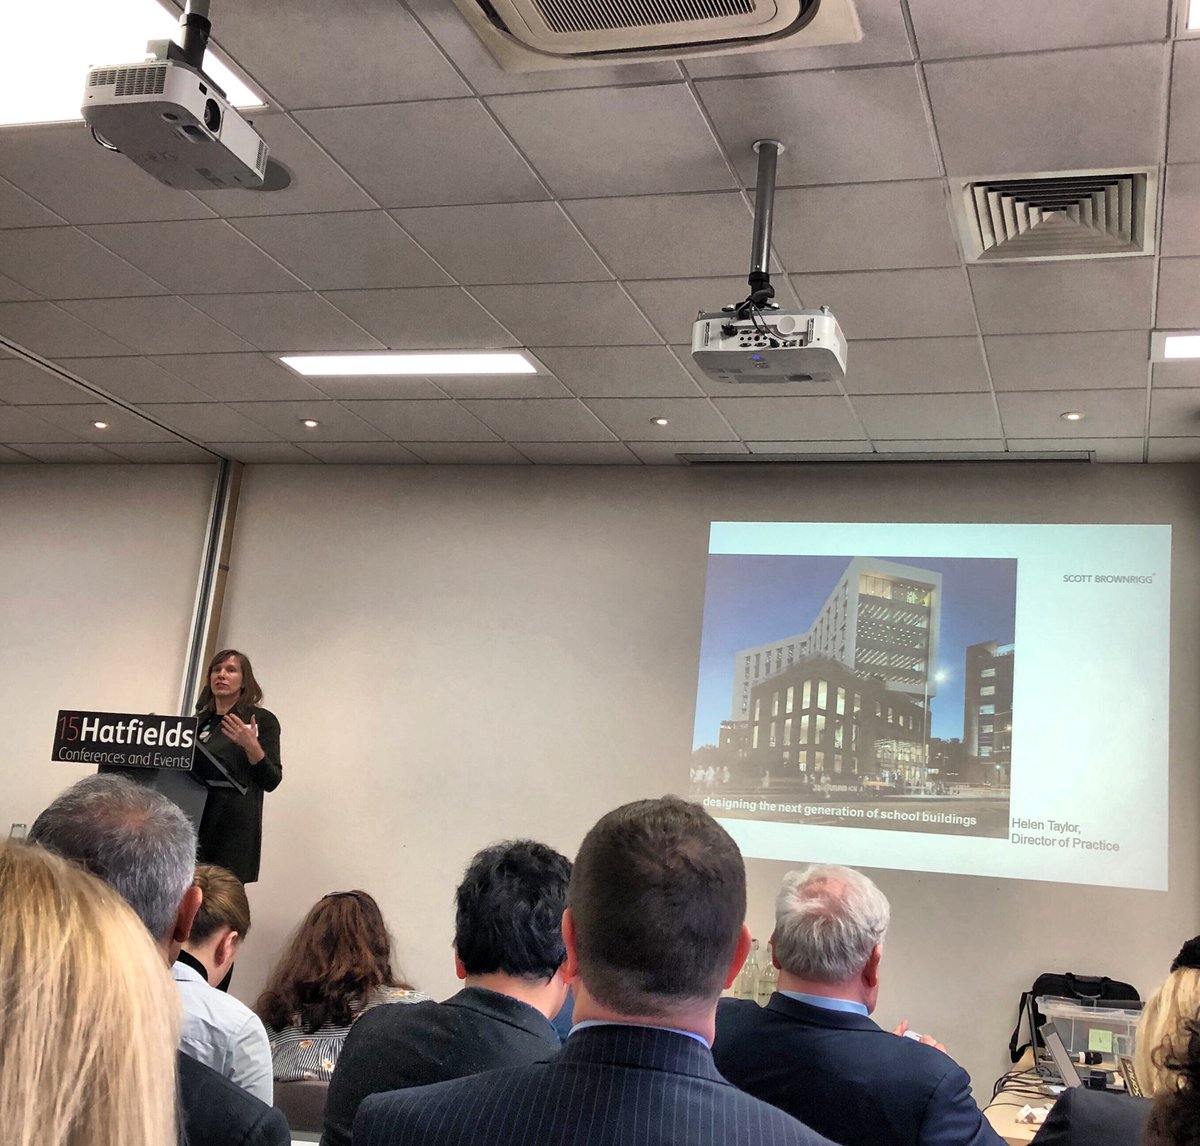 Thought-provoking discussions this morning around the design of the next generation of school buildings, at #WEdFEvents with Helen Taylor of @ScottBrownrigg  #thefutureofeducation @hstarchitect  @WEdFEvents